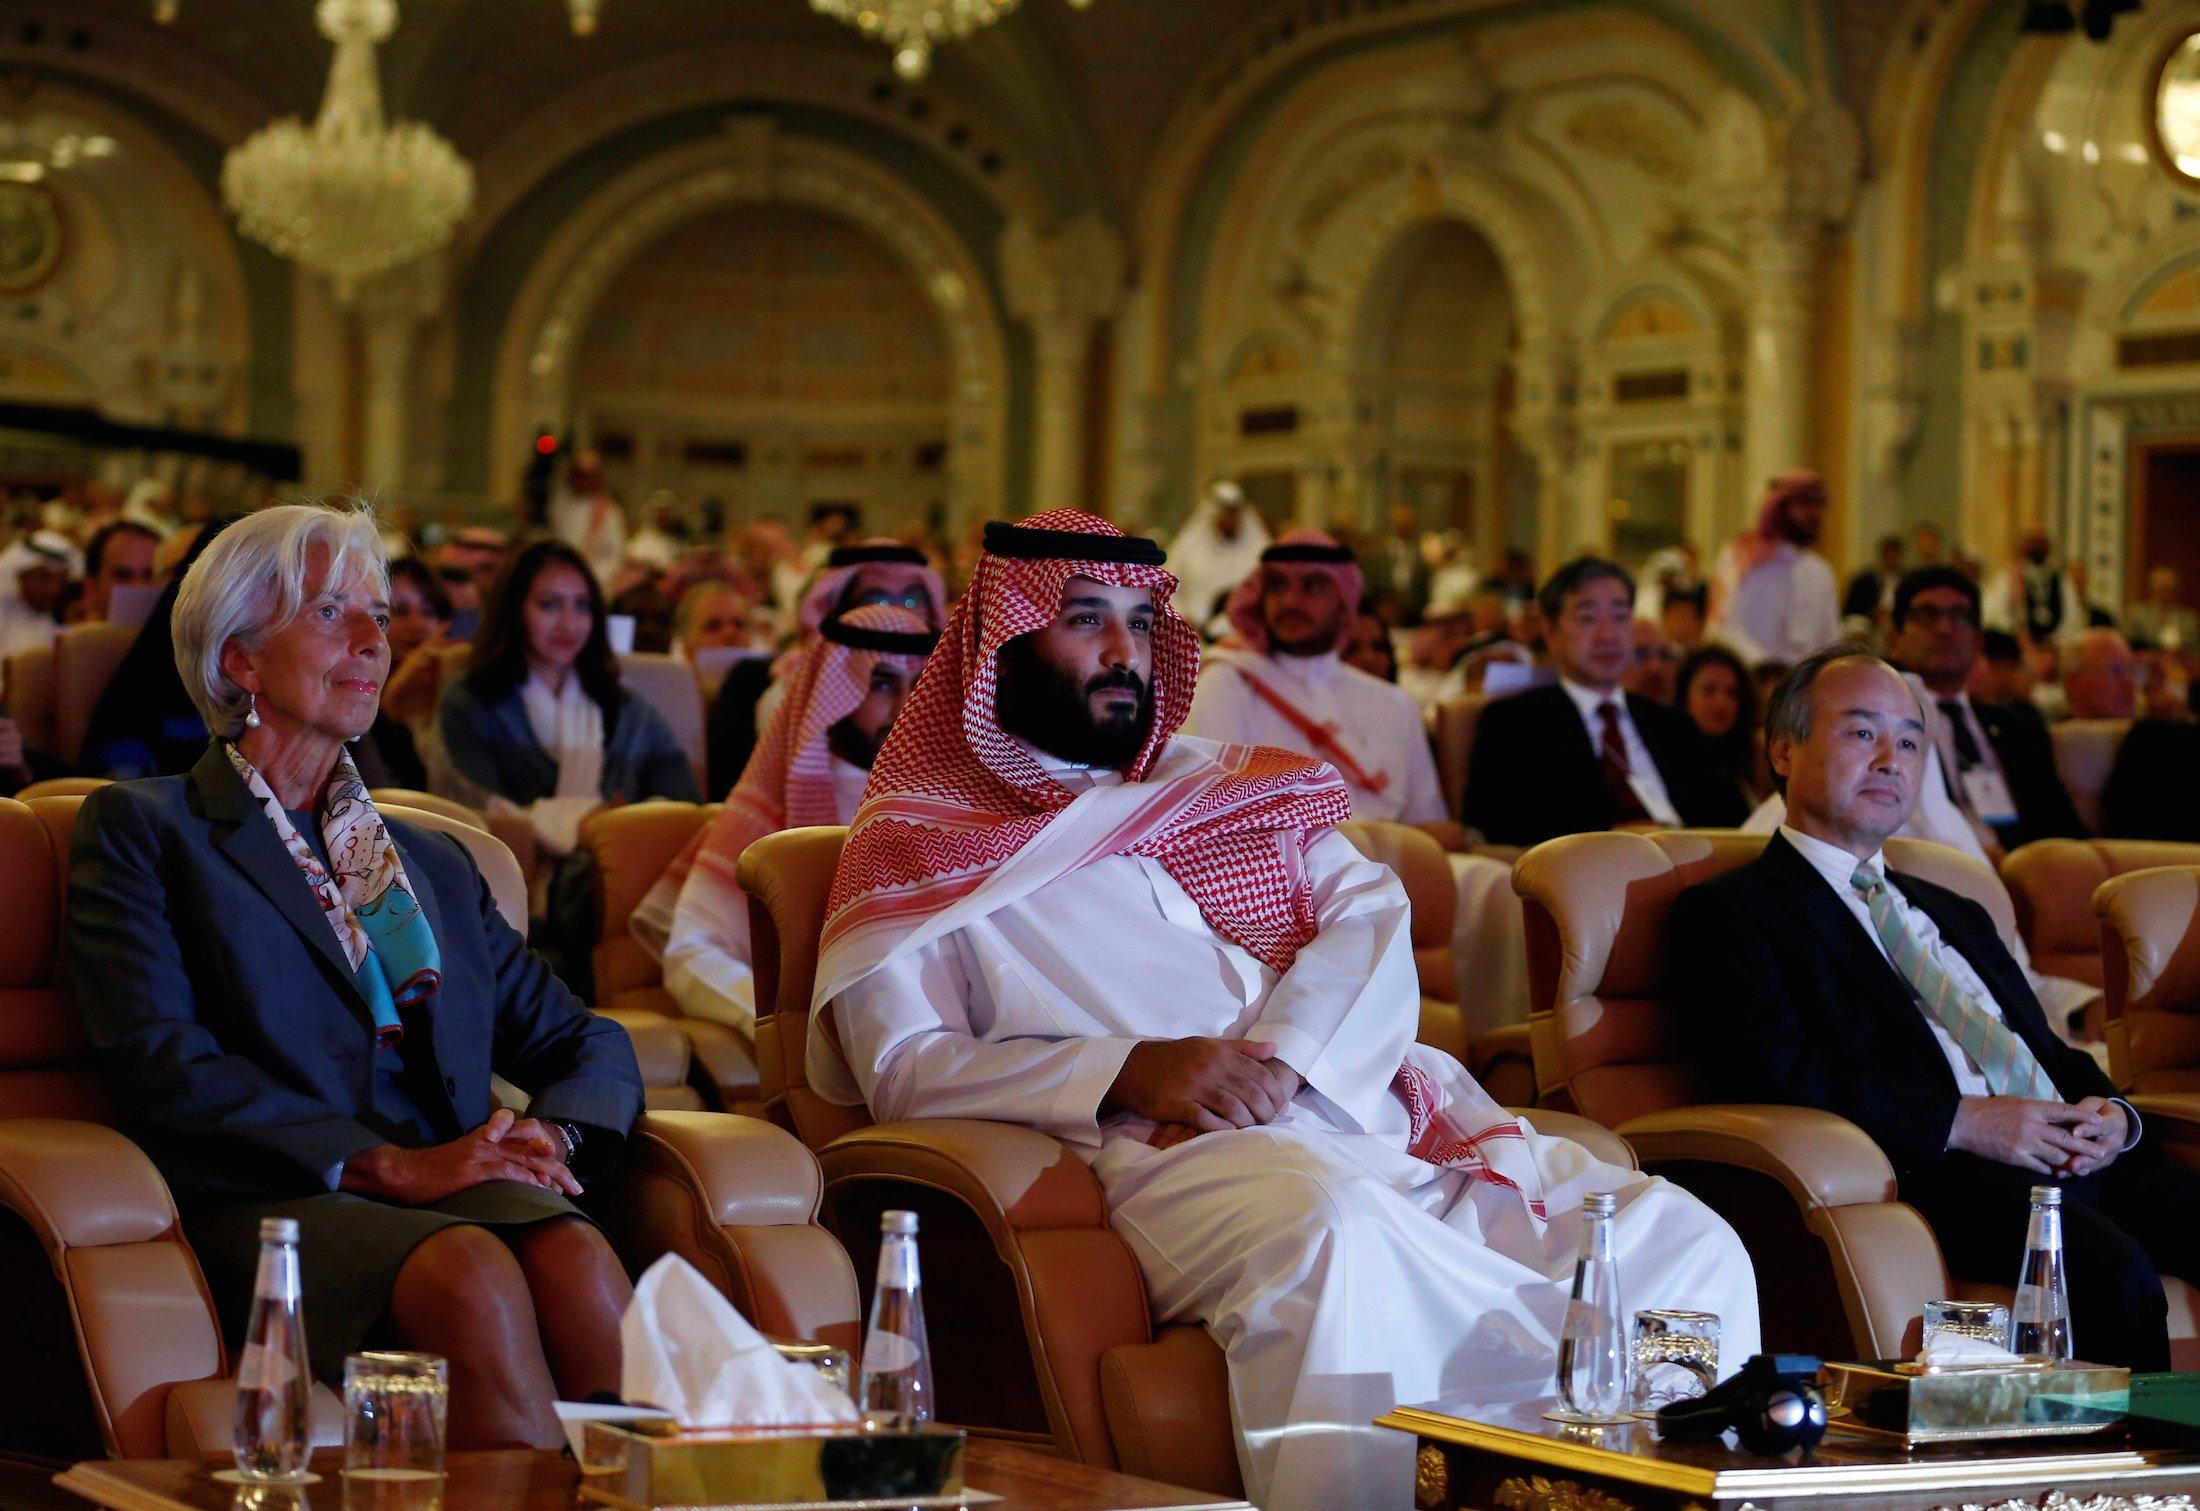 Saudi Crown Prince Mohammed bin Salman, Masayoshi Son, SoftBank Group Corp. Chairman and CEO, and Christine Lagarde, International Monetary Fund (IMF) Managing Director, attend the Future Investment Initiative conference in Riyadh, Saudi Arabia October 24, 2017. Reuters